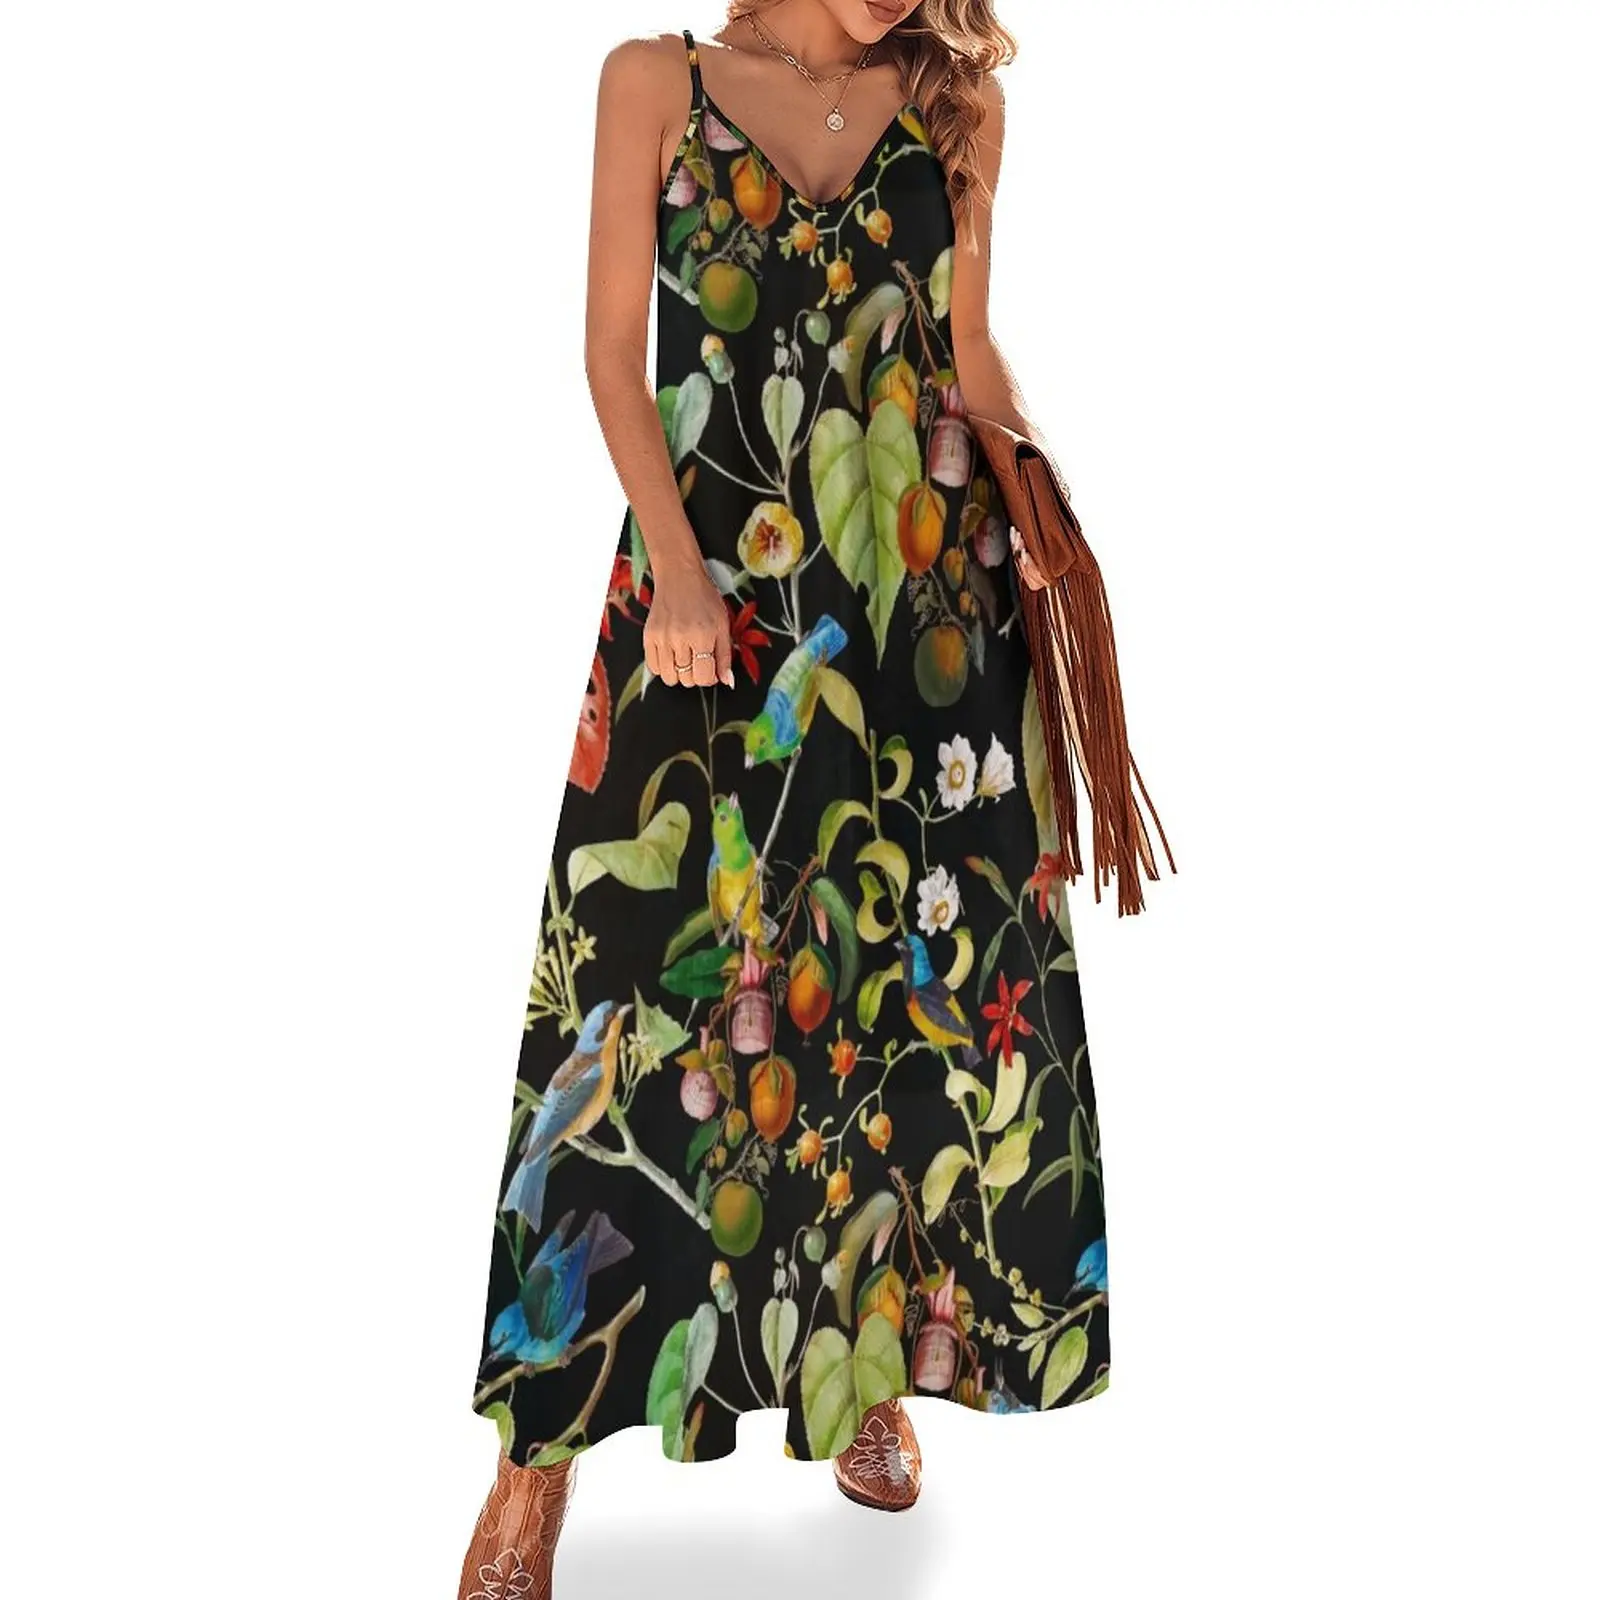 

Vintage tropical sing birds and fruits pattern black Sleeveless Dress beach outfits for women women clothes